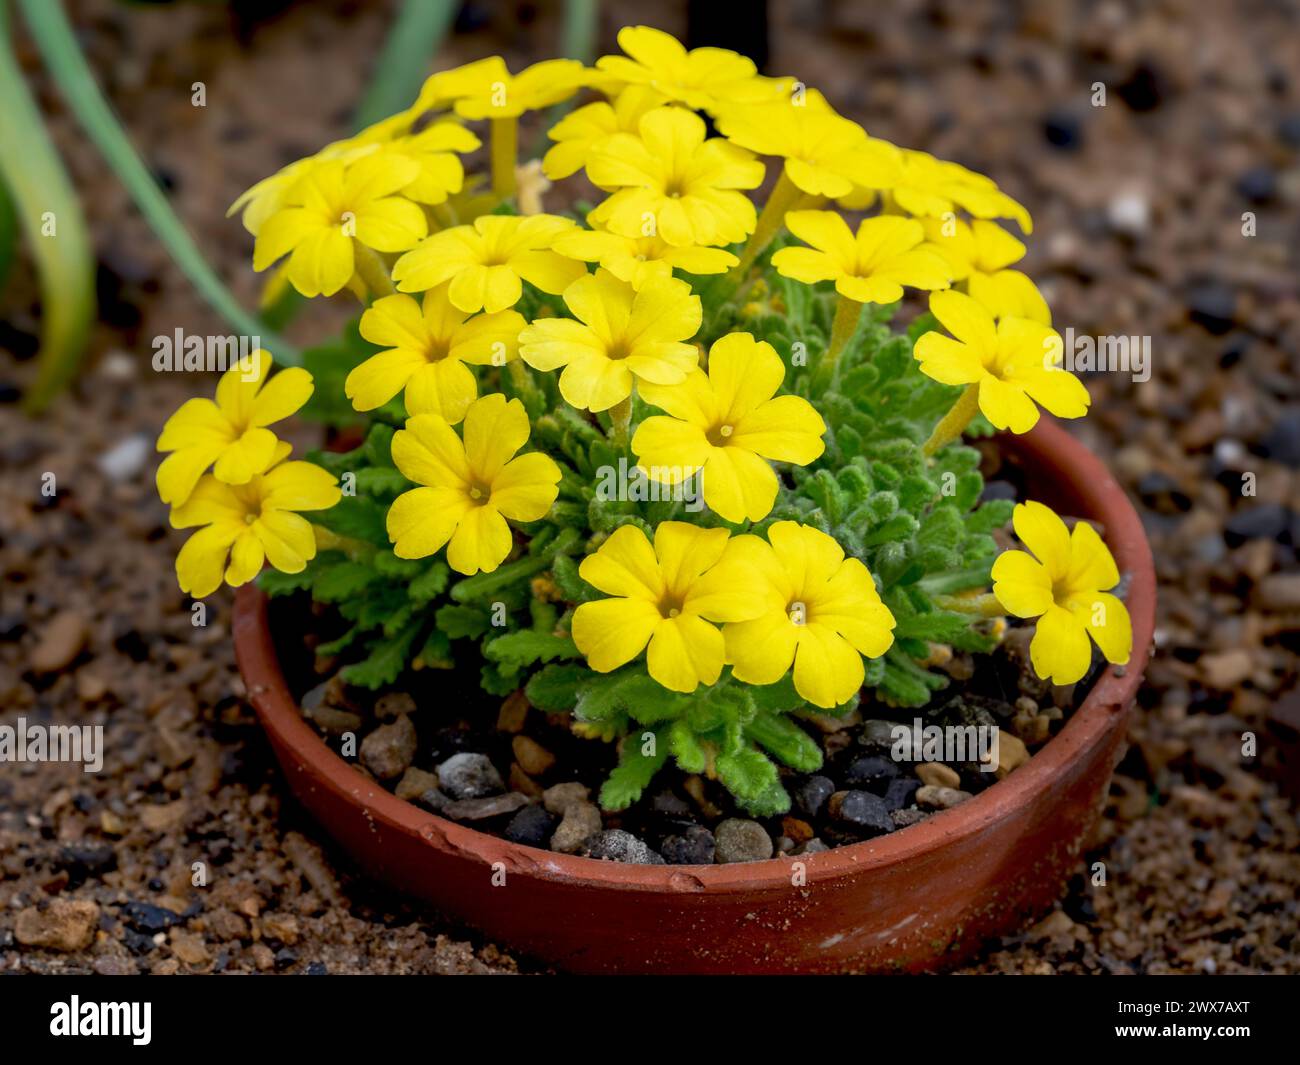 Dionysia aretioides Bevere plant with yellow flowers Stock Photo